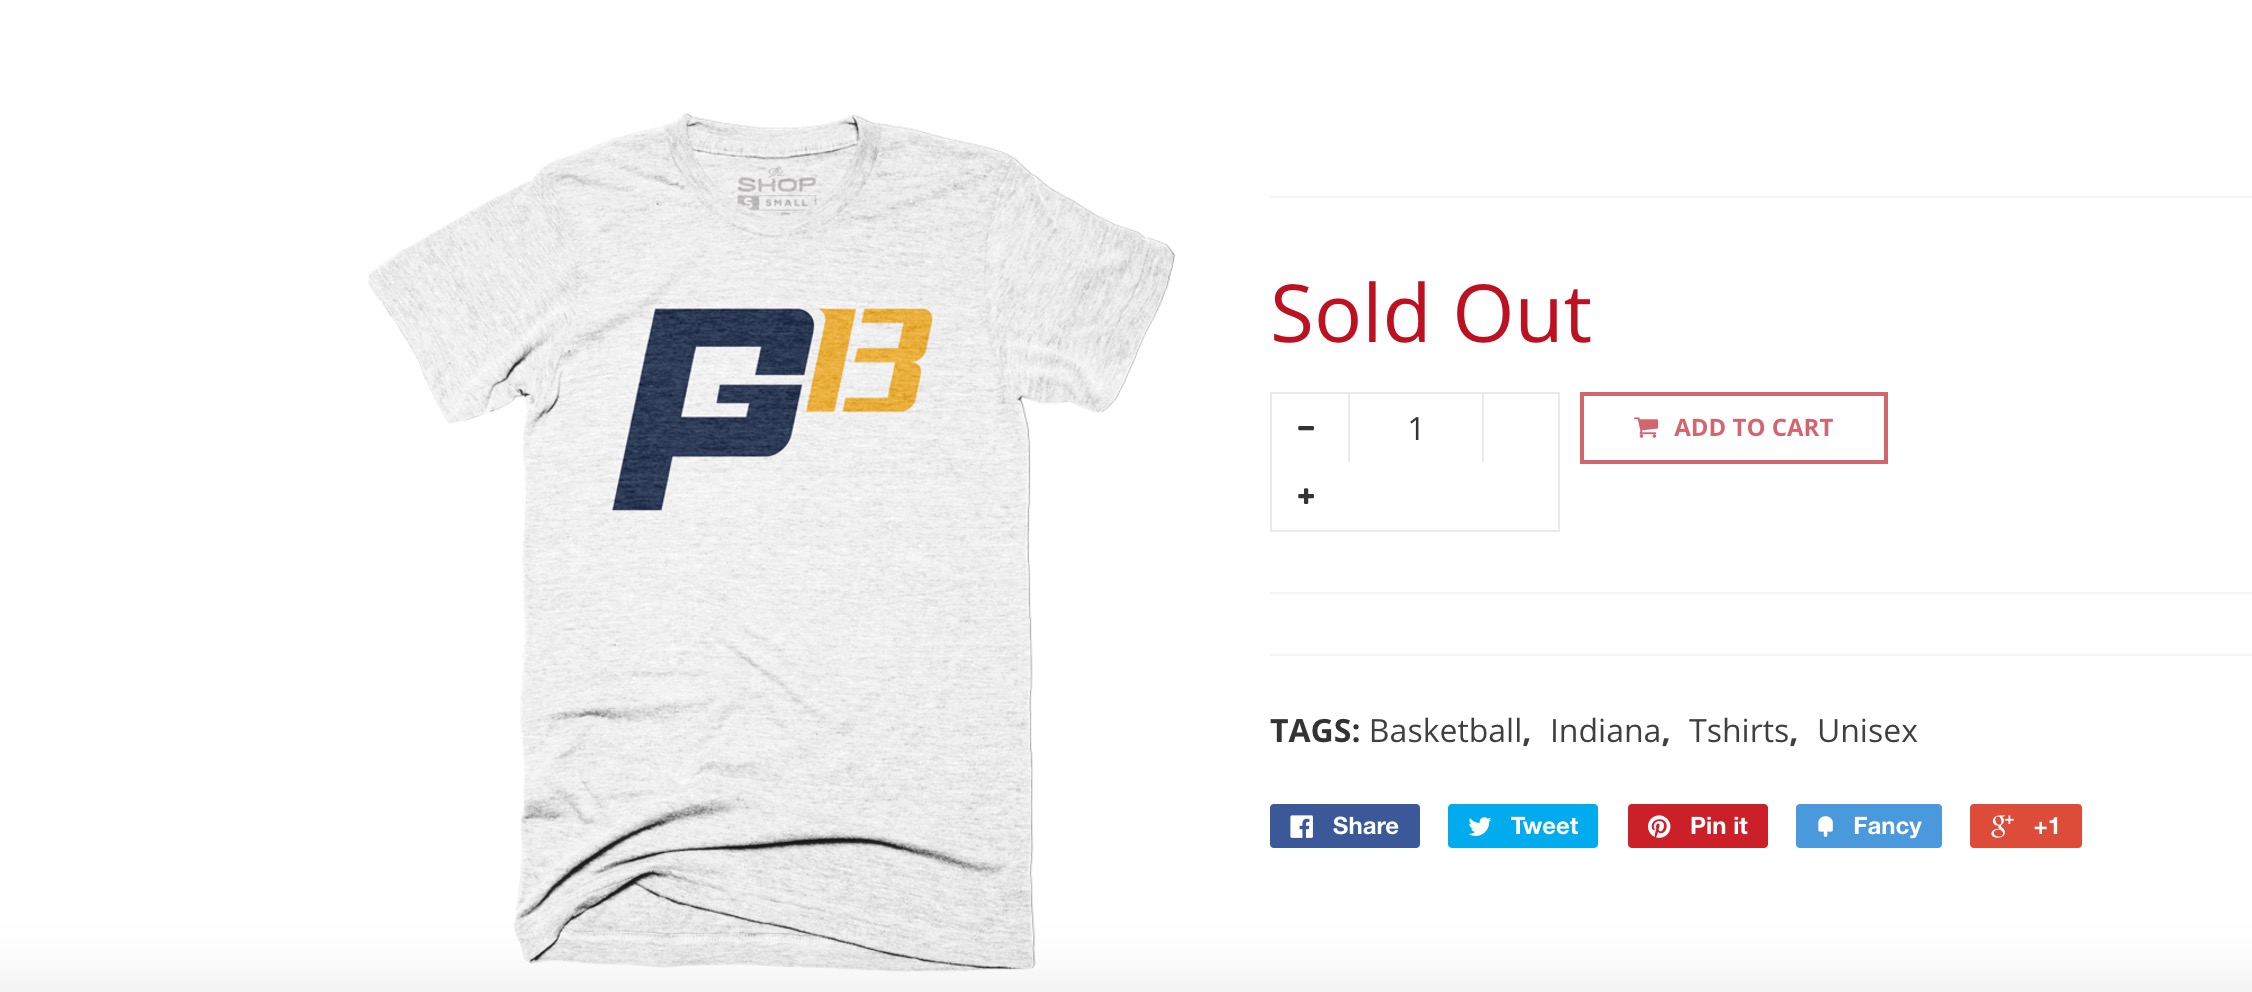 Indiana clothing store gave away all its Paul George gear for free